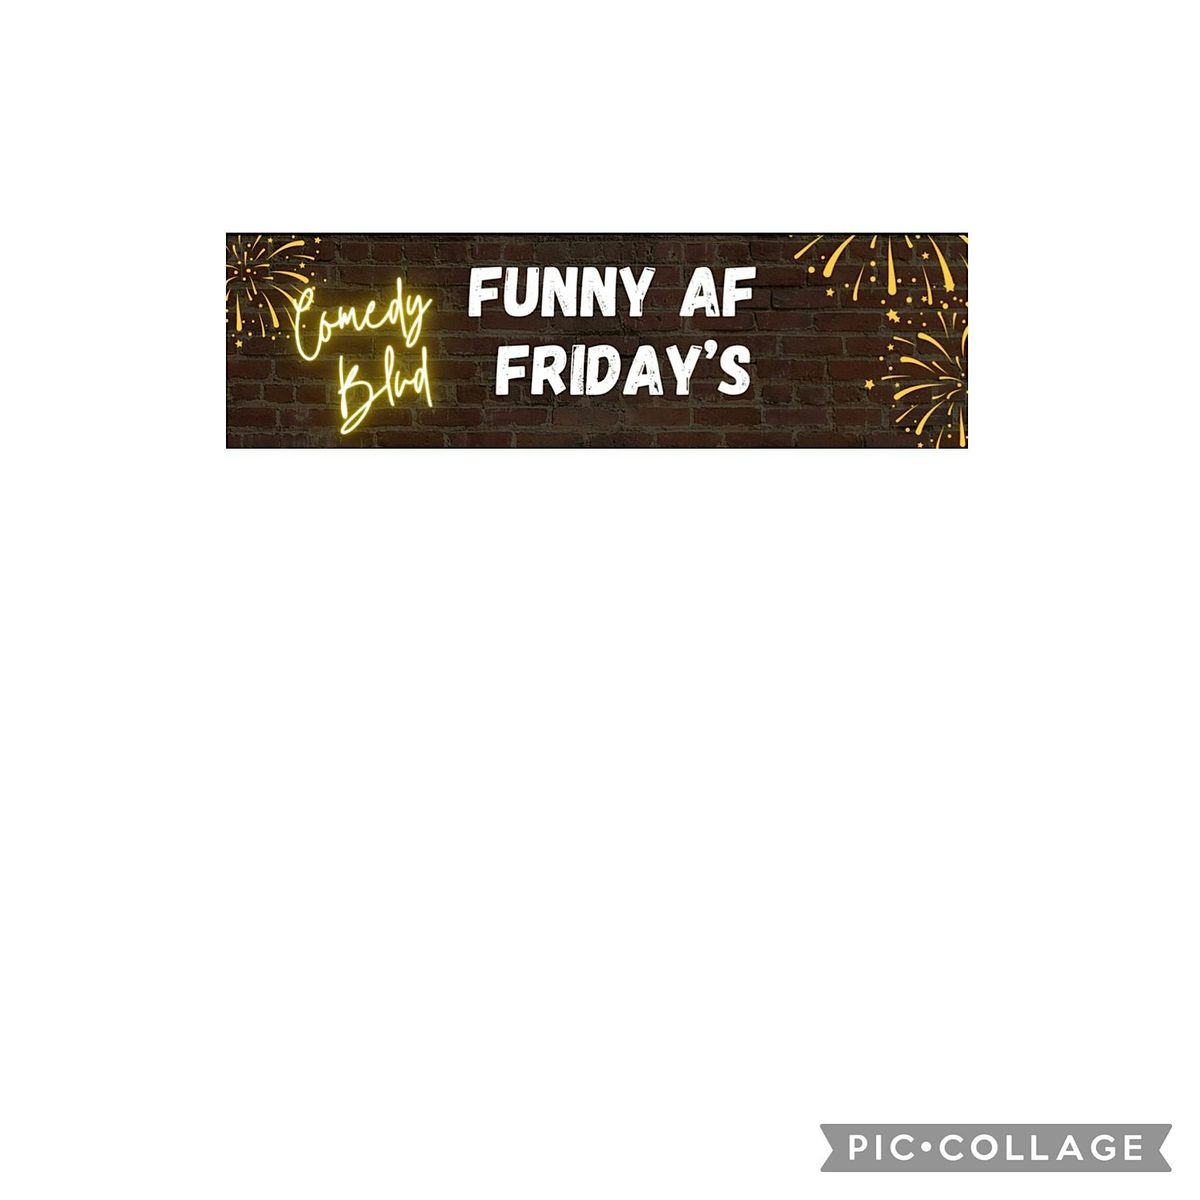 Friday, June 28th, 8:30 PM - Funny AF Friday's!!! Comedy Blvd